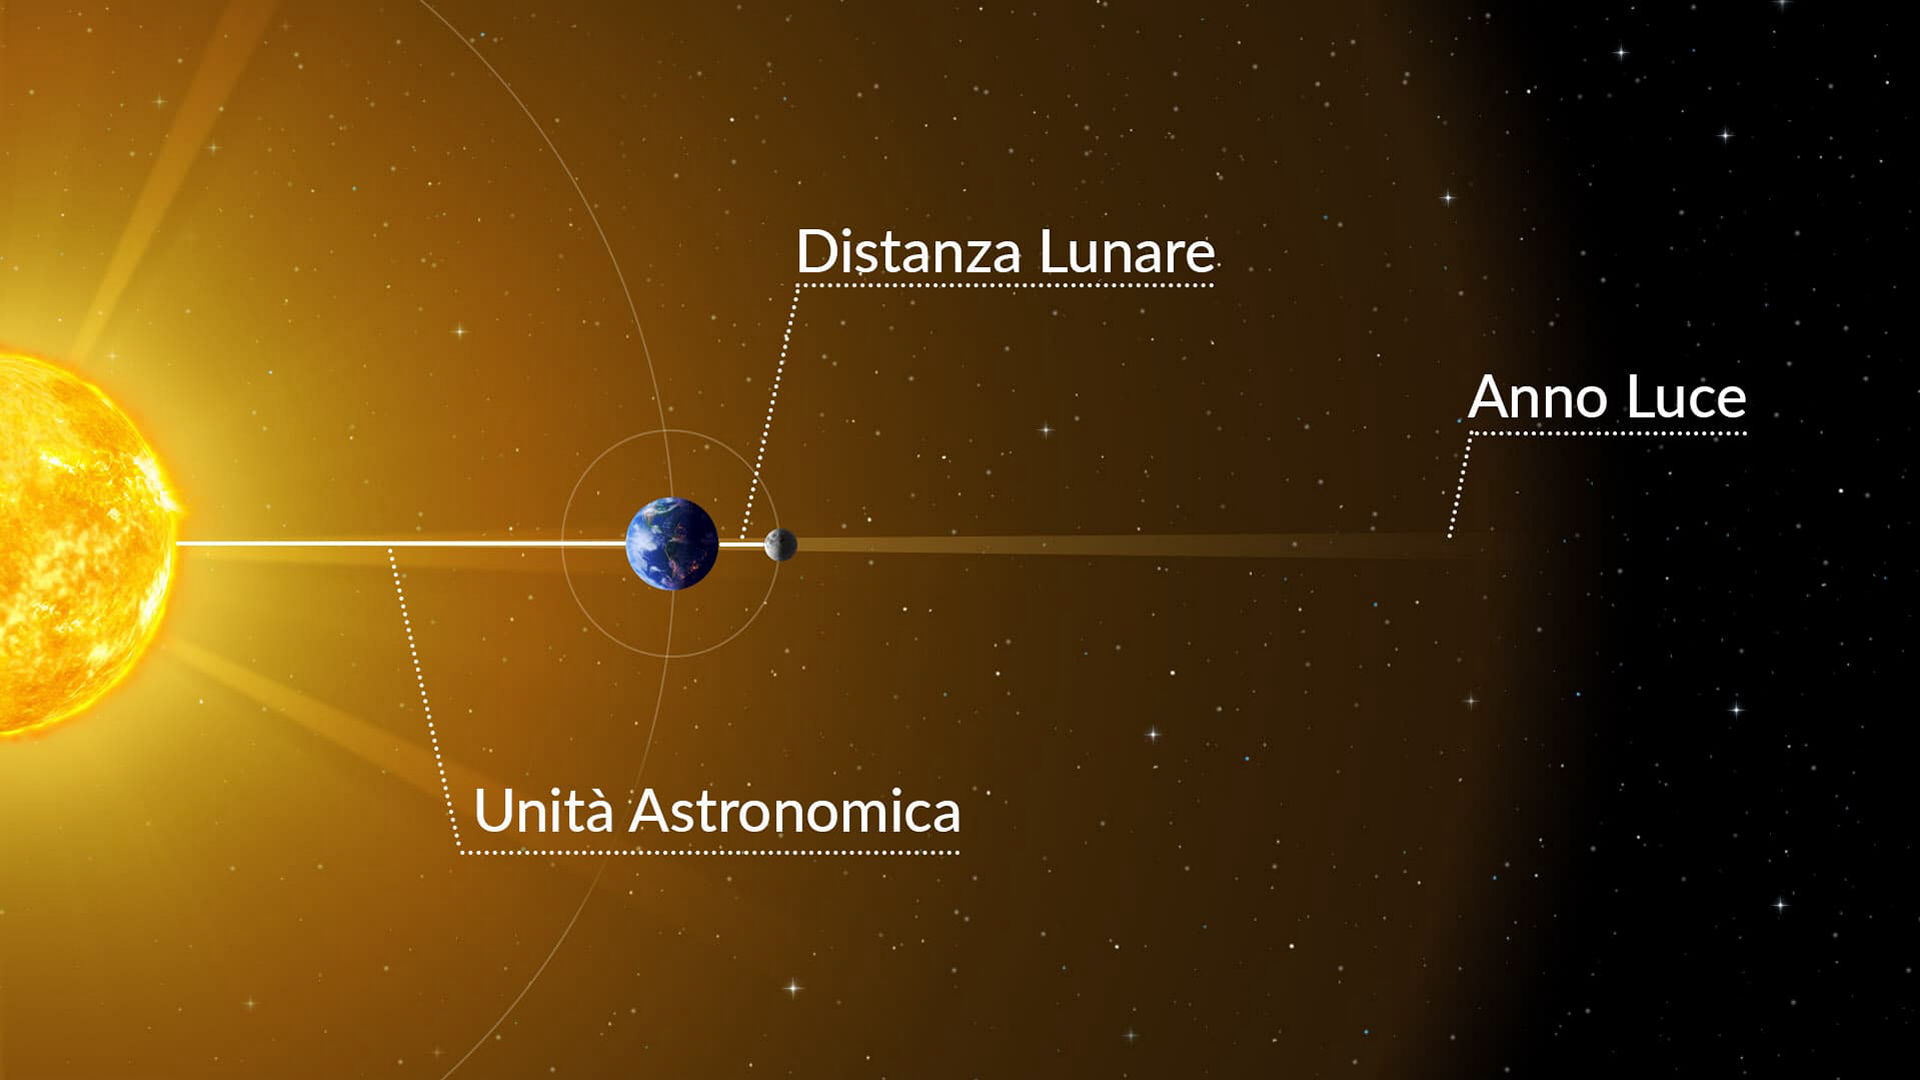 Units of distance used in astronomy